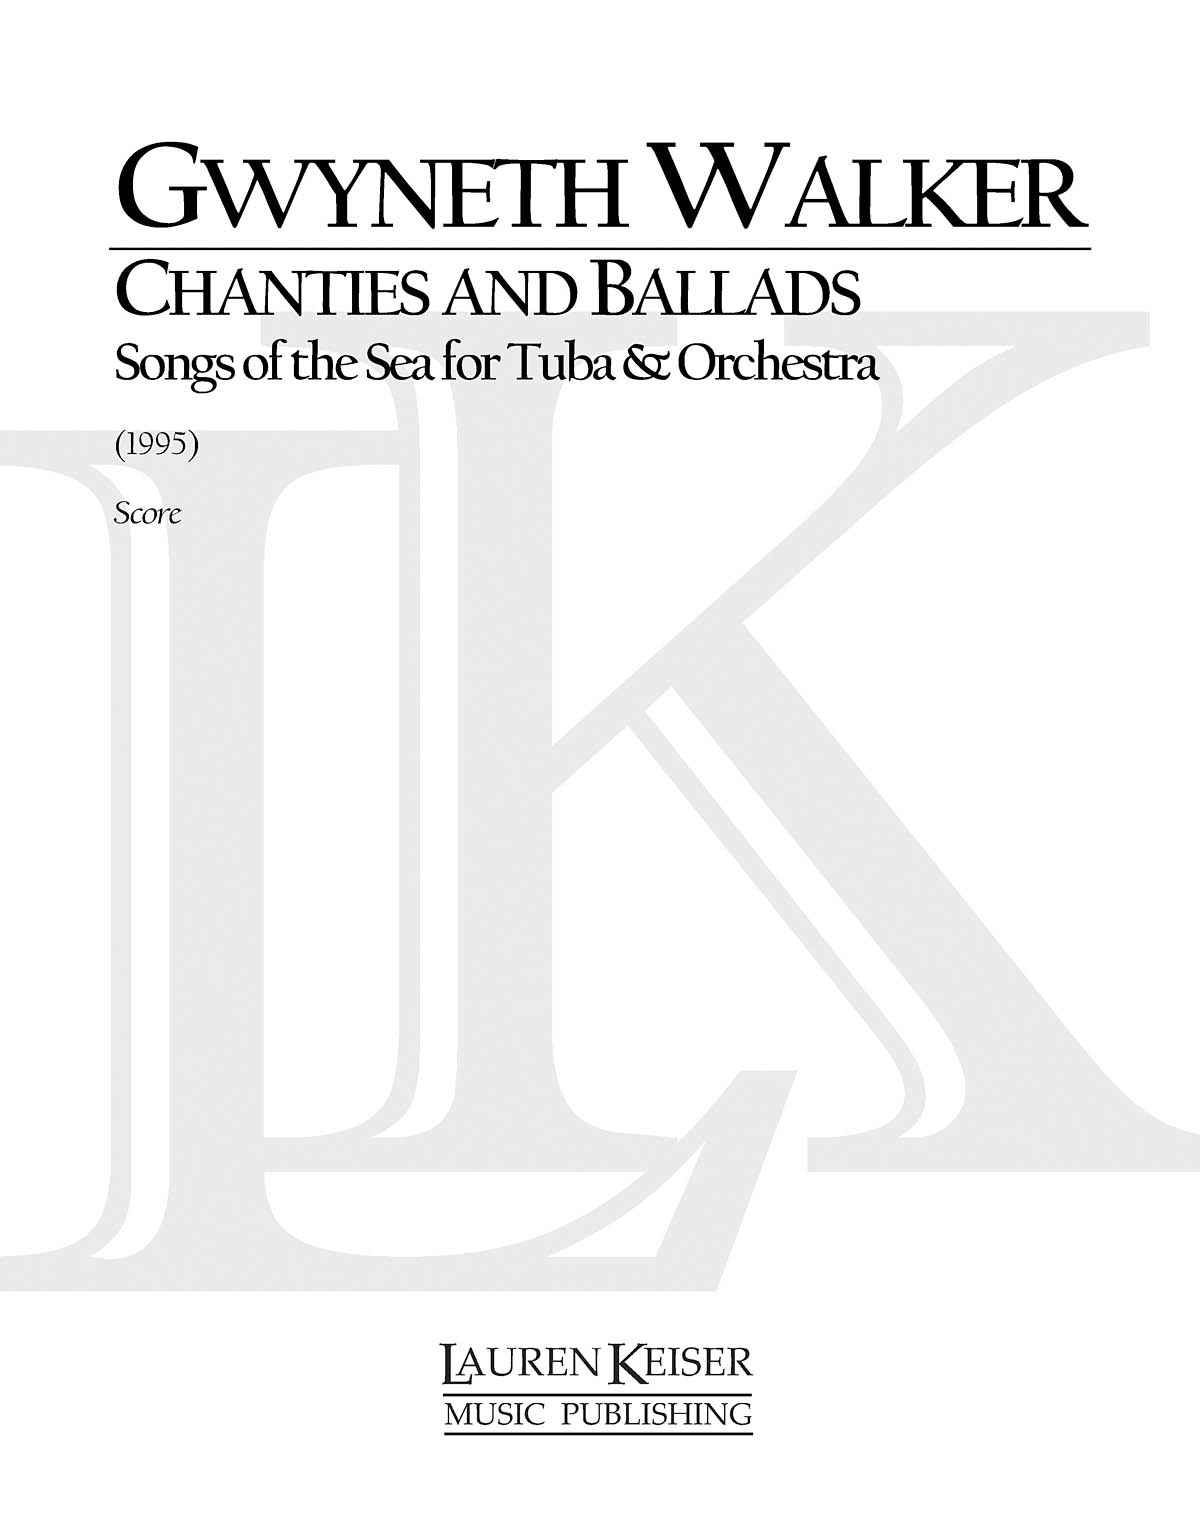 Gwyneth Walker: Songs of the Sea for Tuba and Orchestra: Orchestra and Solo: